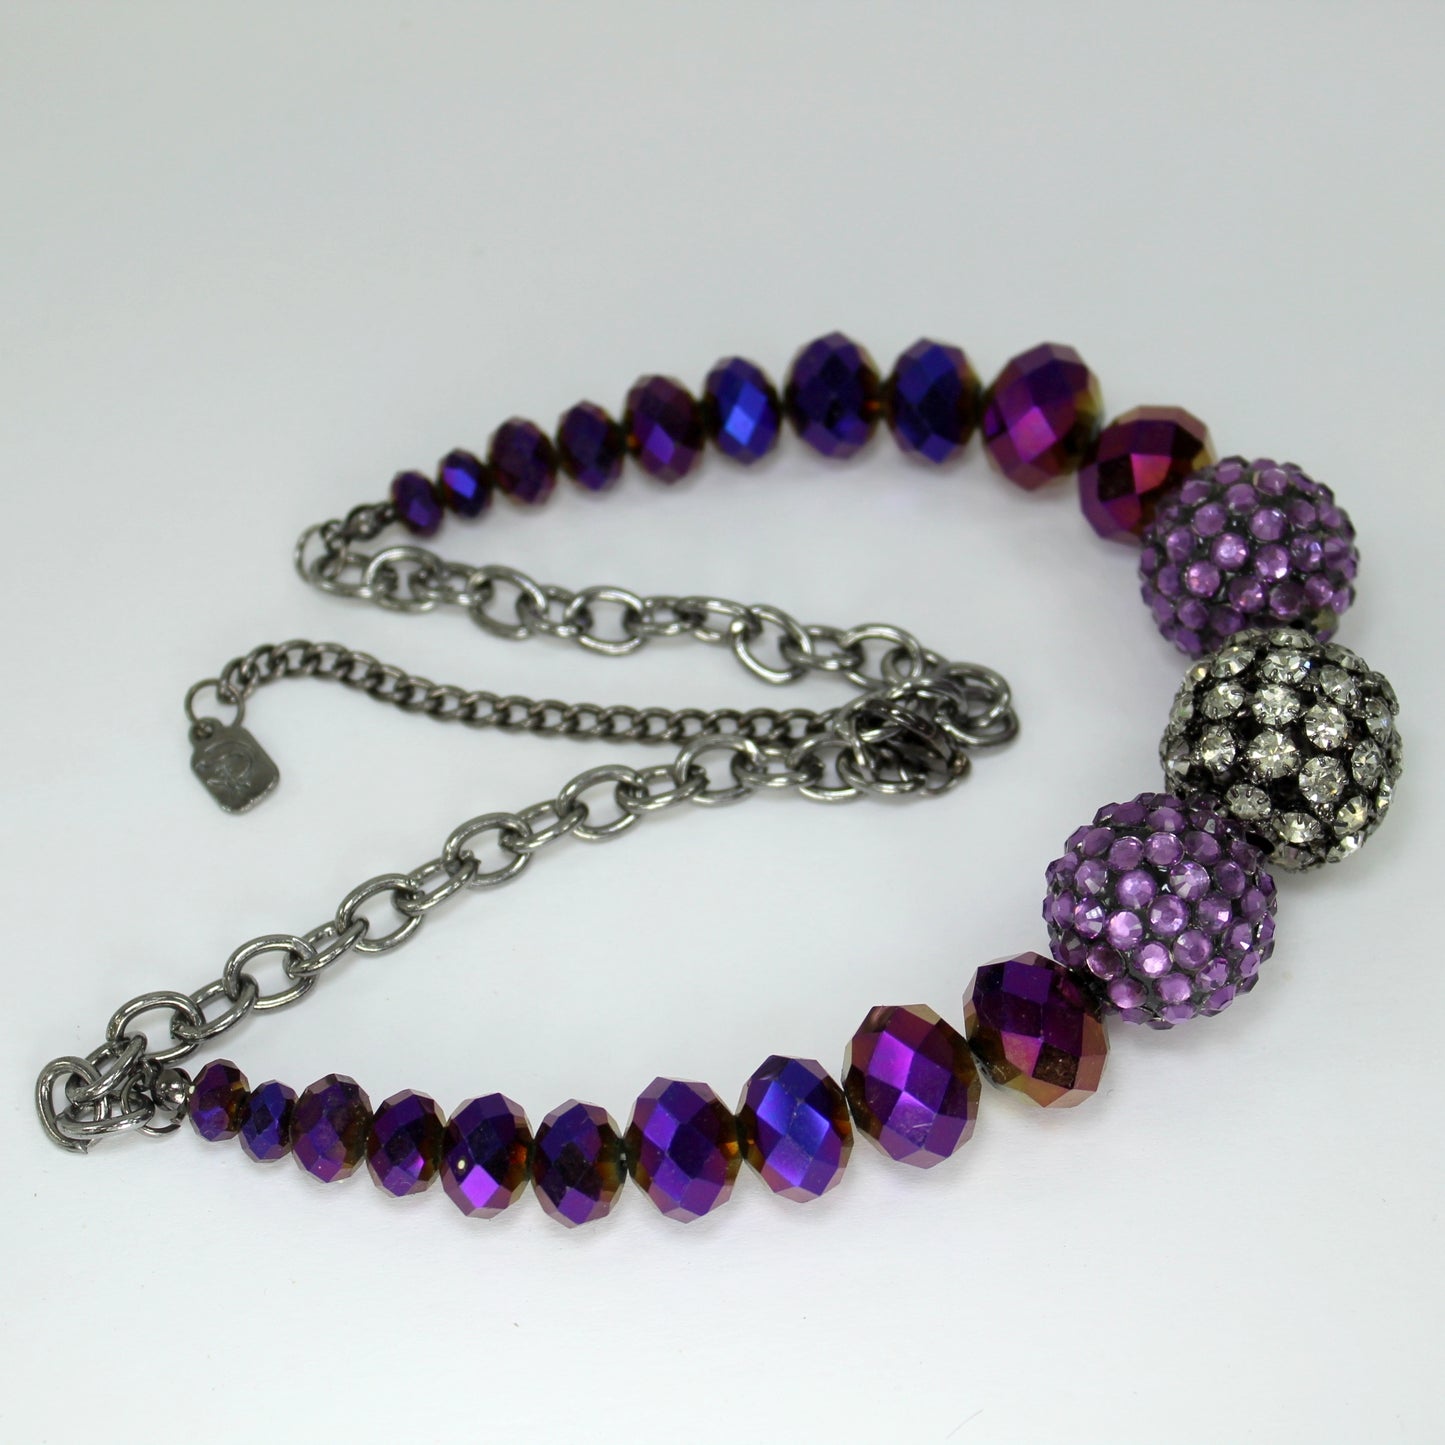 Designed signed Necklace Amethyst Crystal & Iridescent Cut Beads Alive with Sparkle showy runway necklace